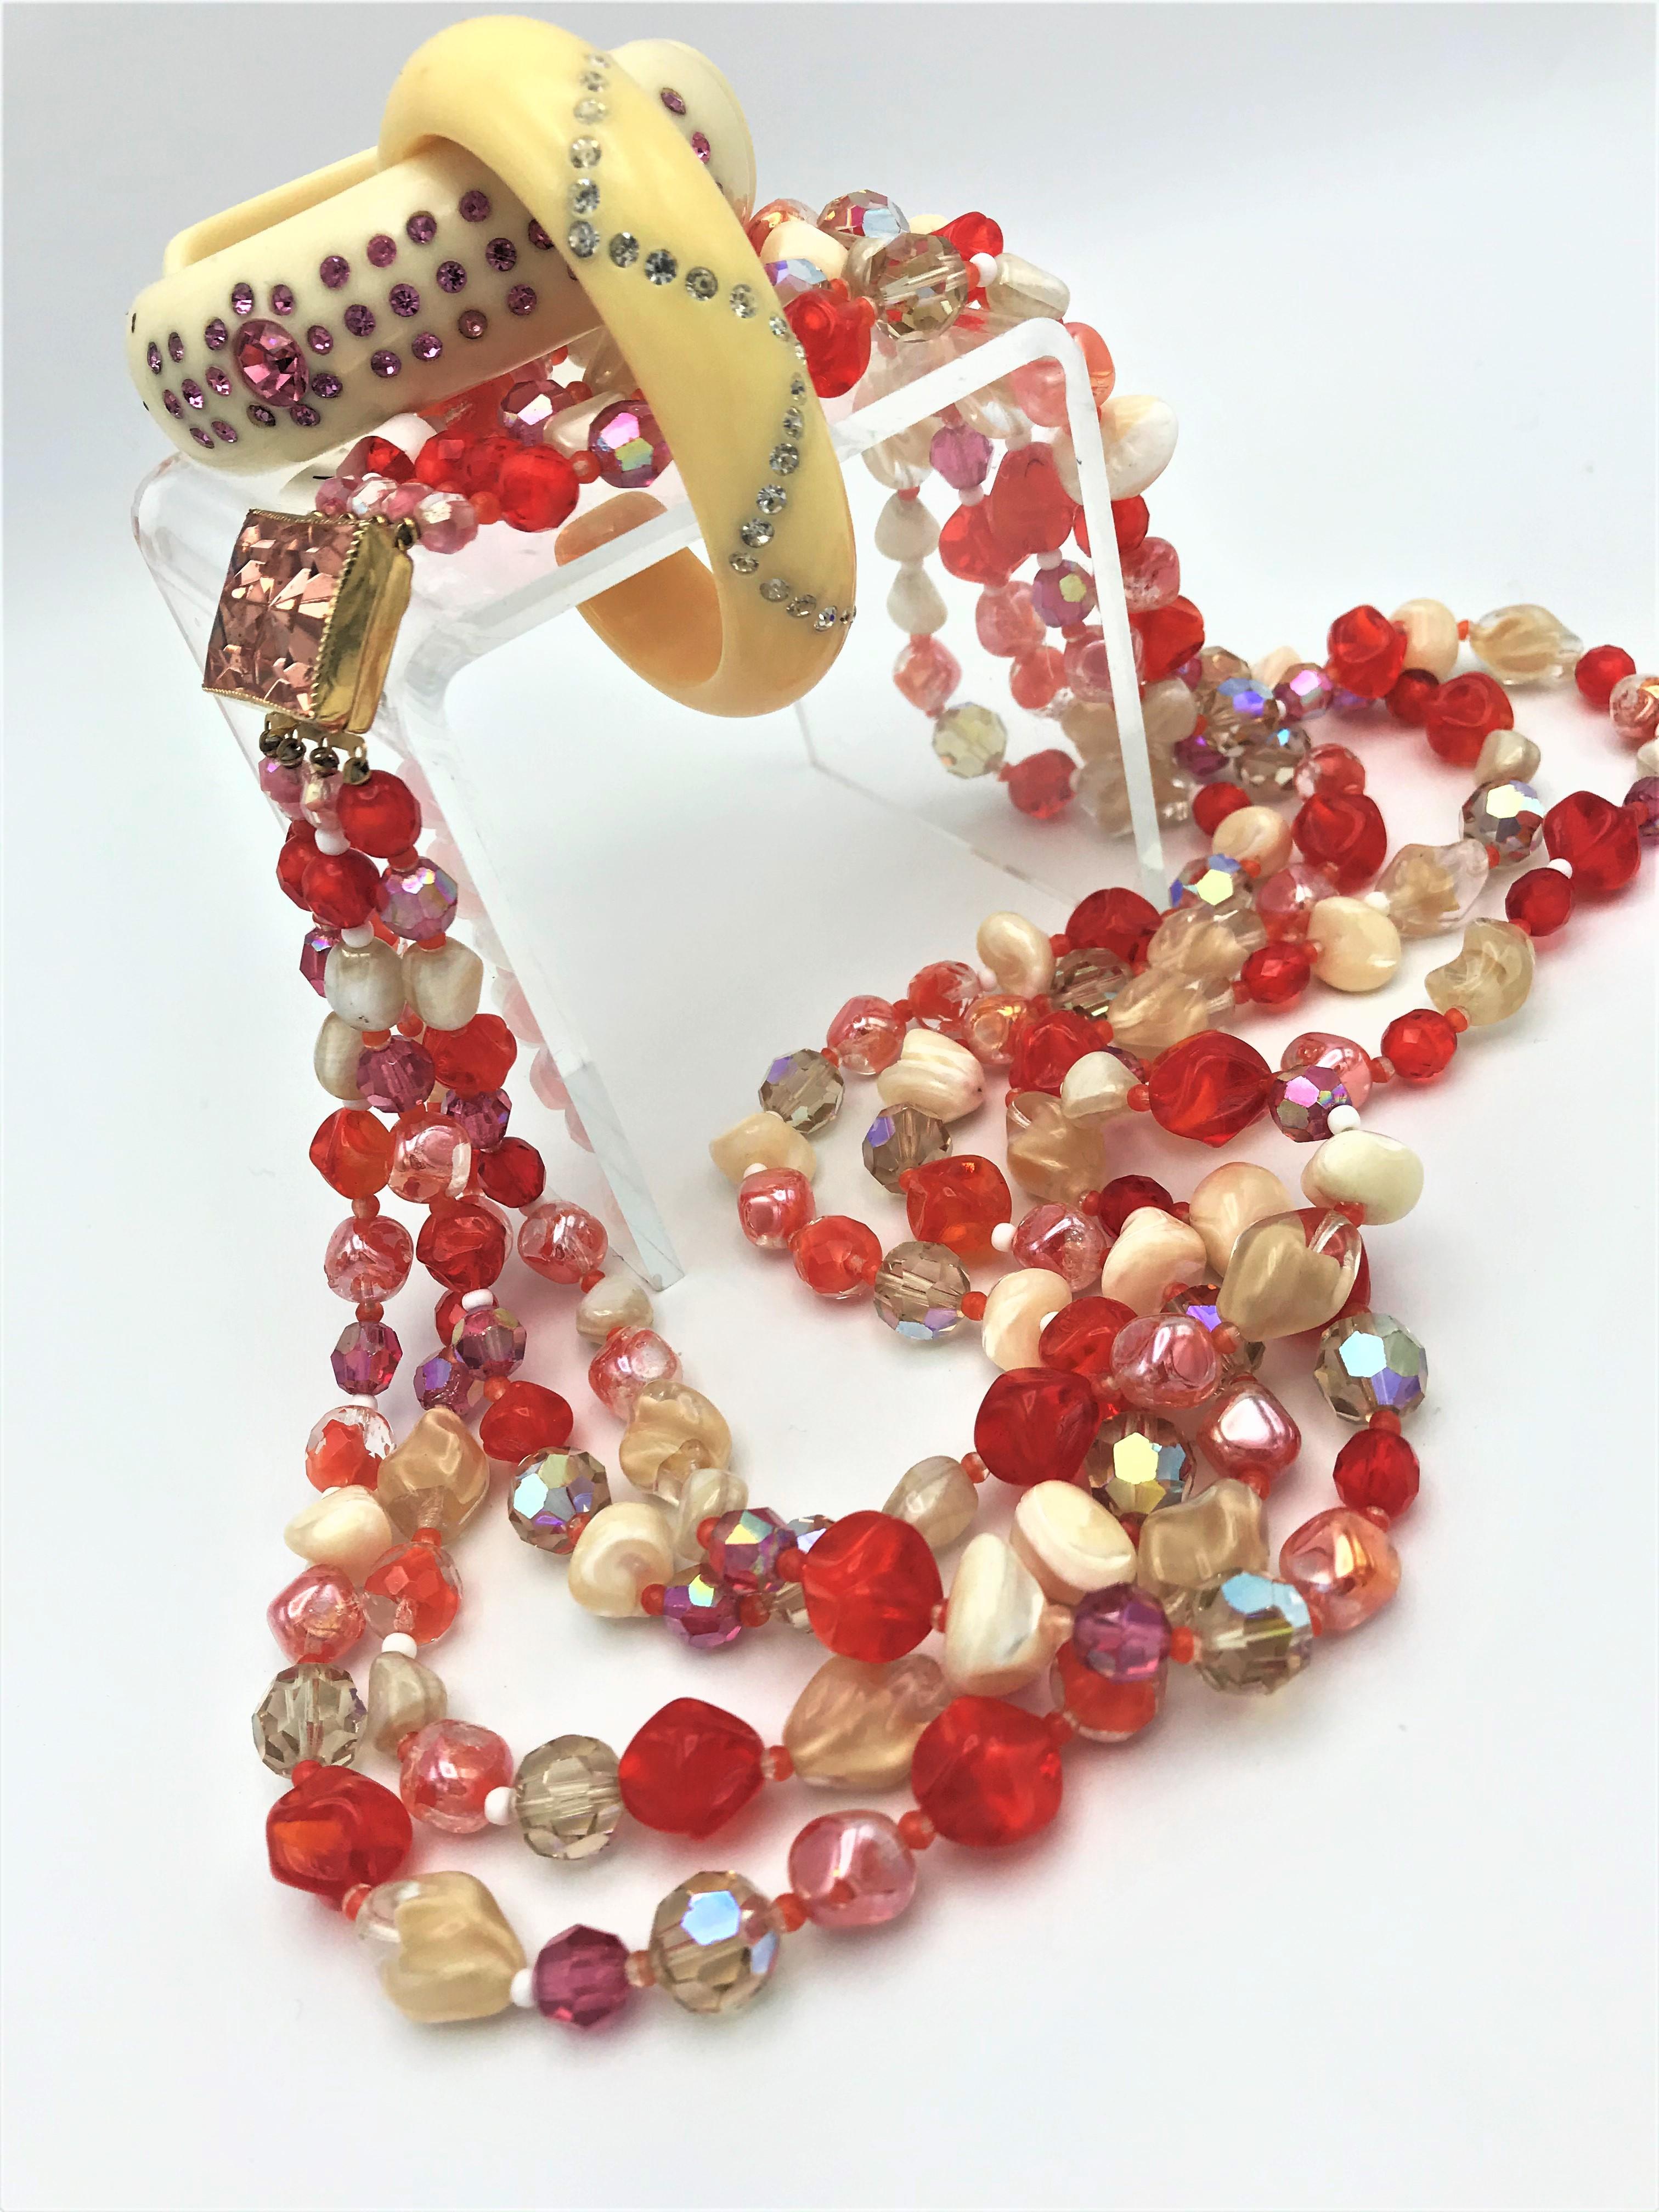 Bead Hattie Carnegie 4 row necklace with different  beads and different colors, 1950s For Sale